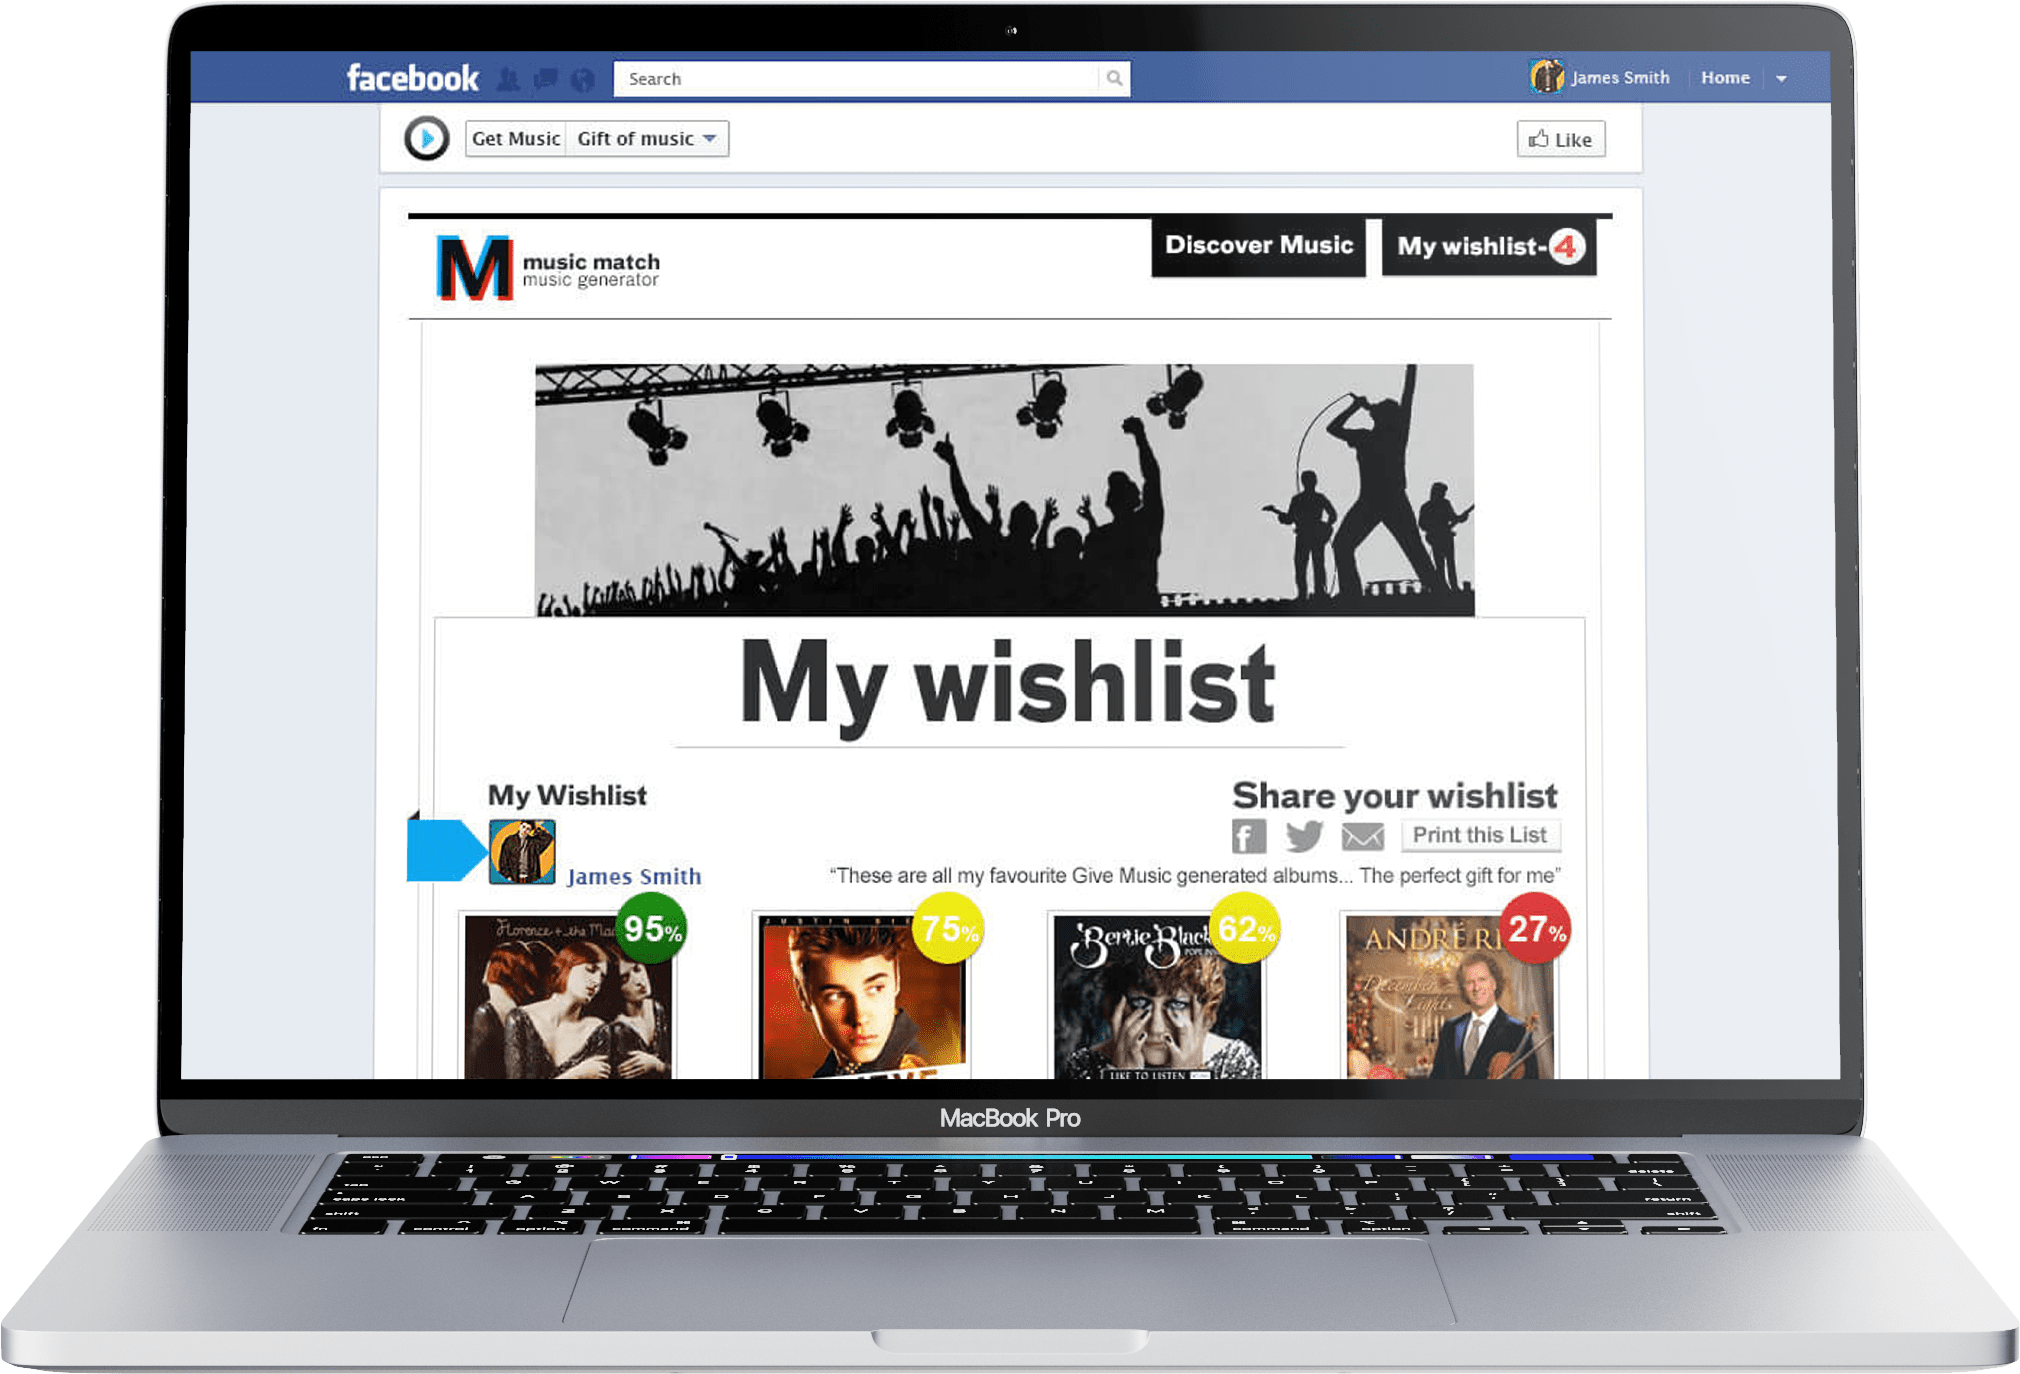 Redwerk Case Study: How we adapted Facebook music recommendations app for launch in the American market